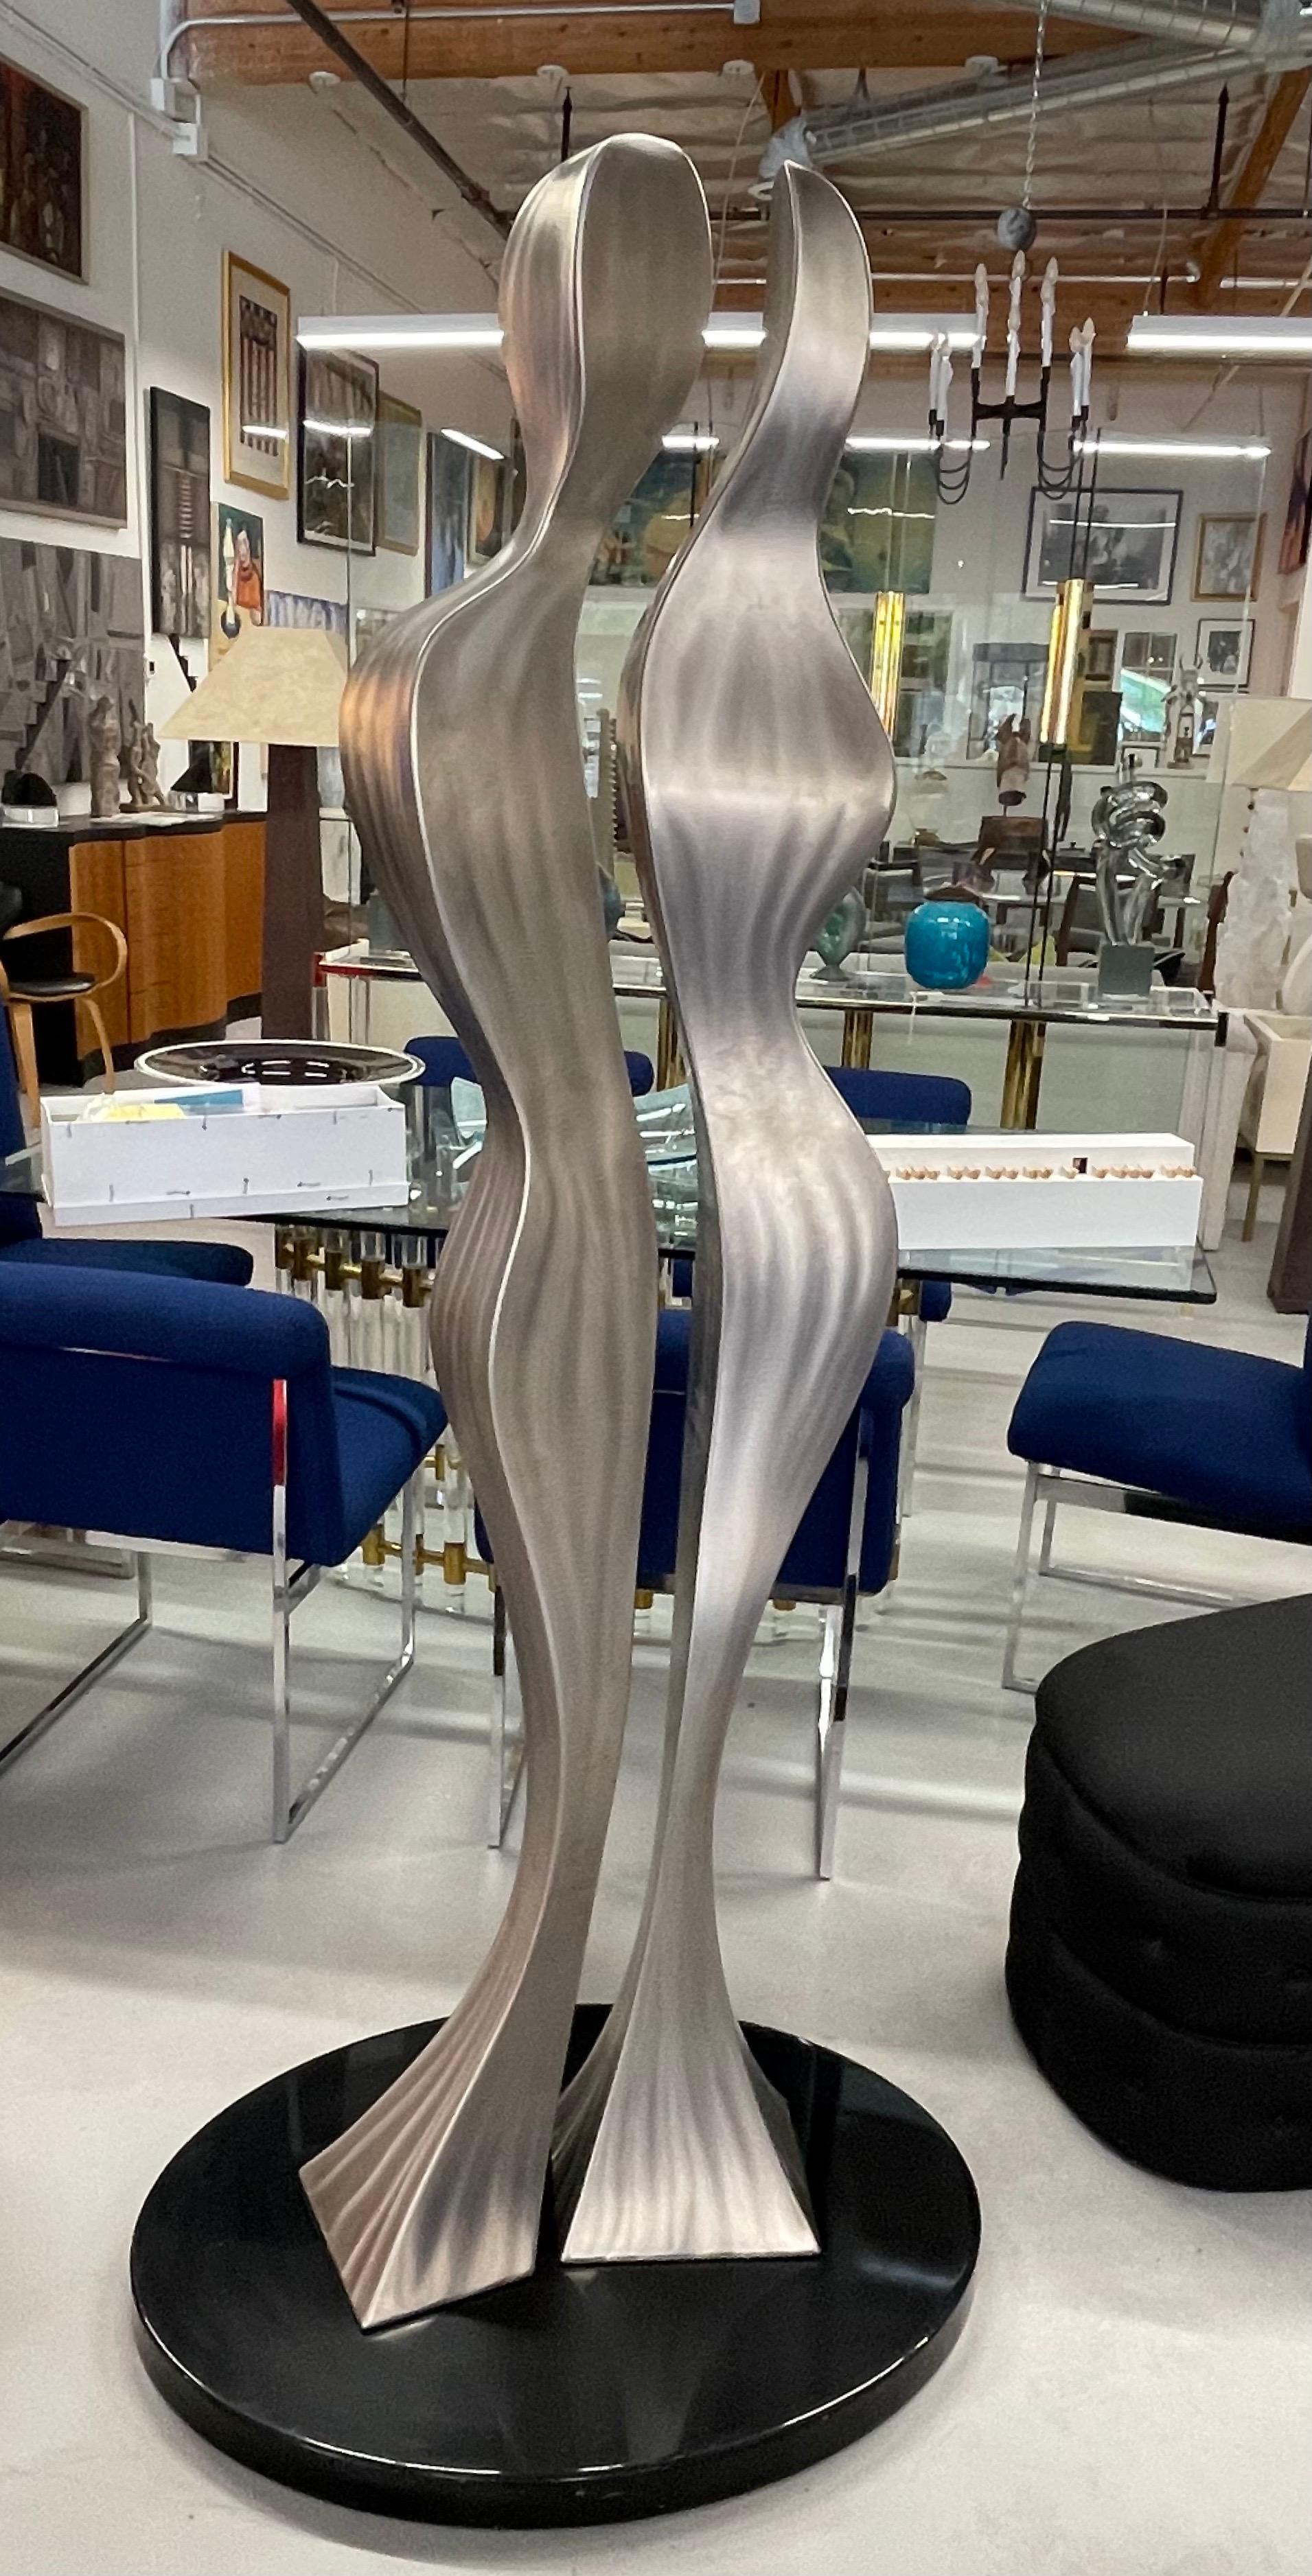 A large wonderful stainless steel sculpture titled Couples by the noted California artist James Hill. Signed and dated 2015. On a heavy polished painted steel oval base. The sculpture measures 72 inches tall, while the base measures 34x24 inches in